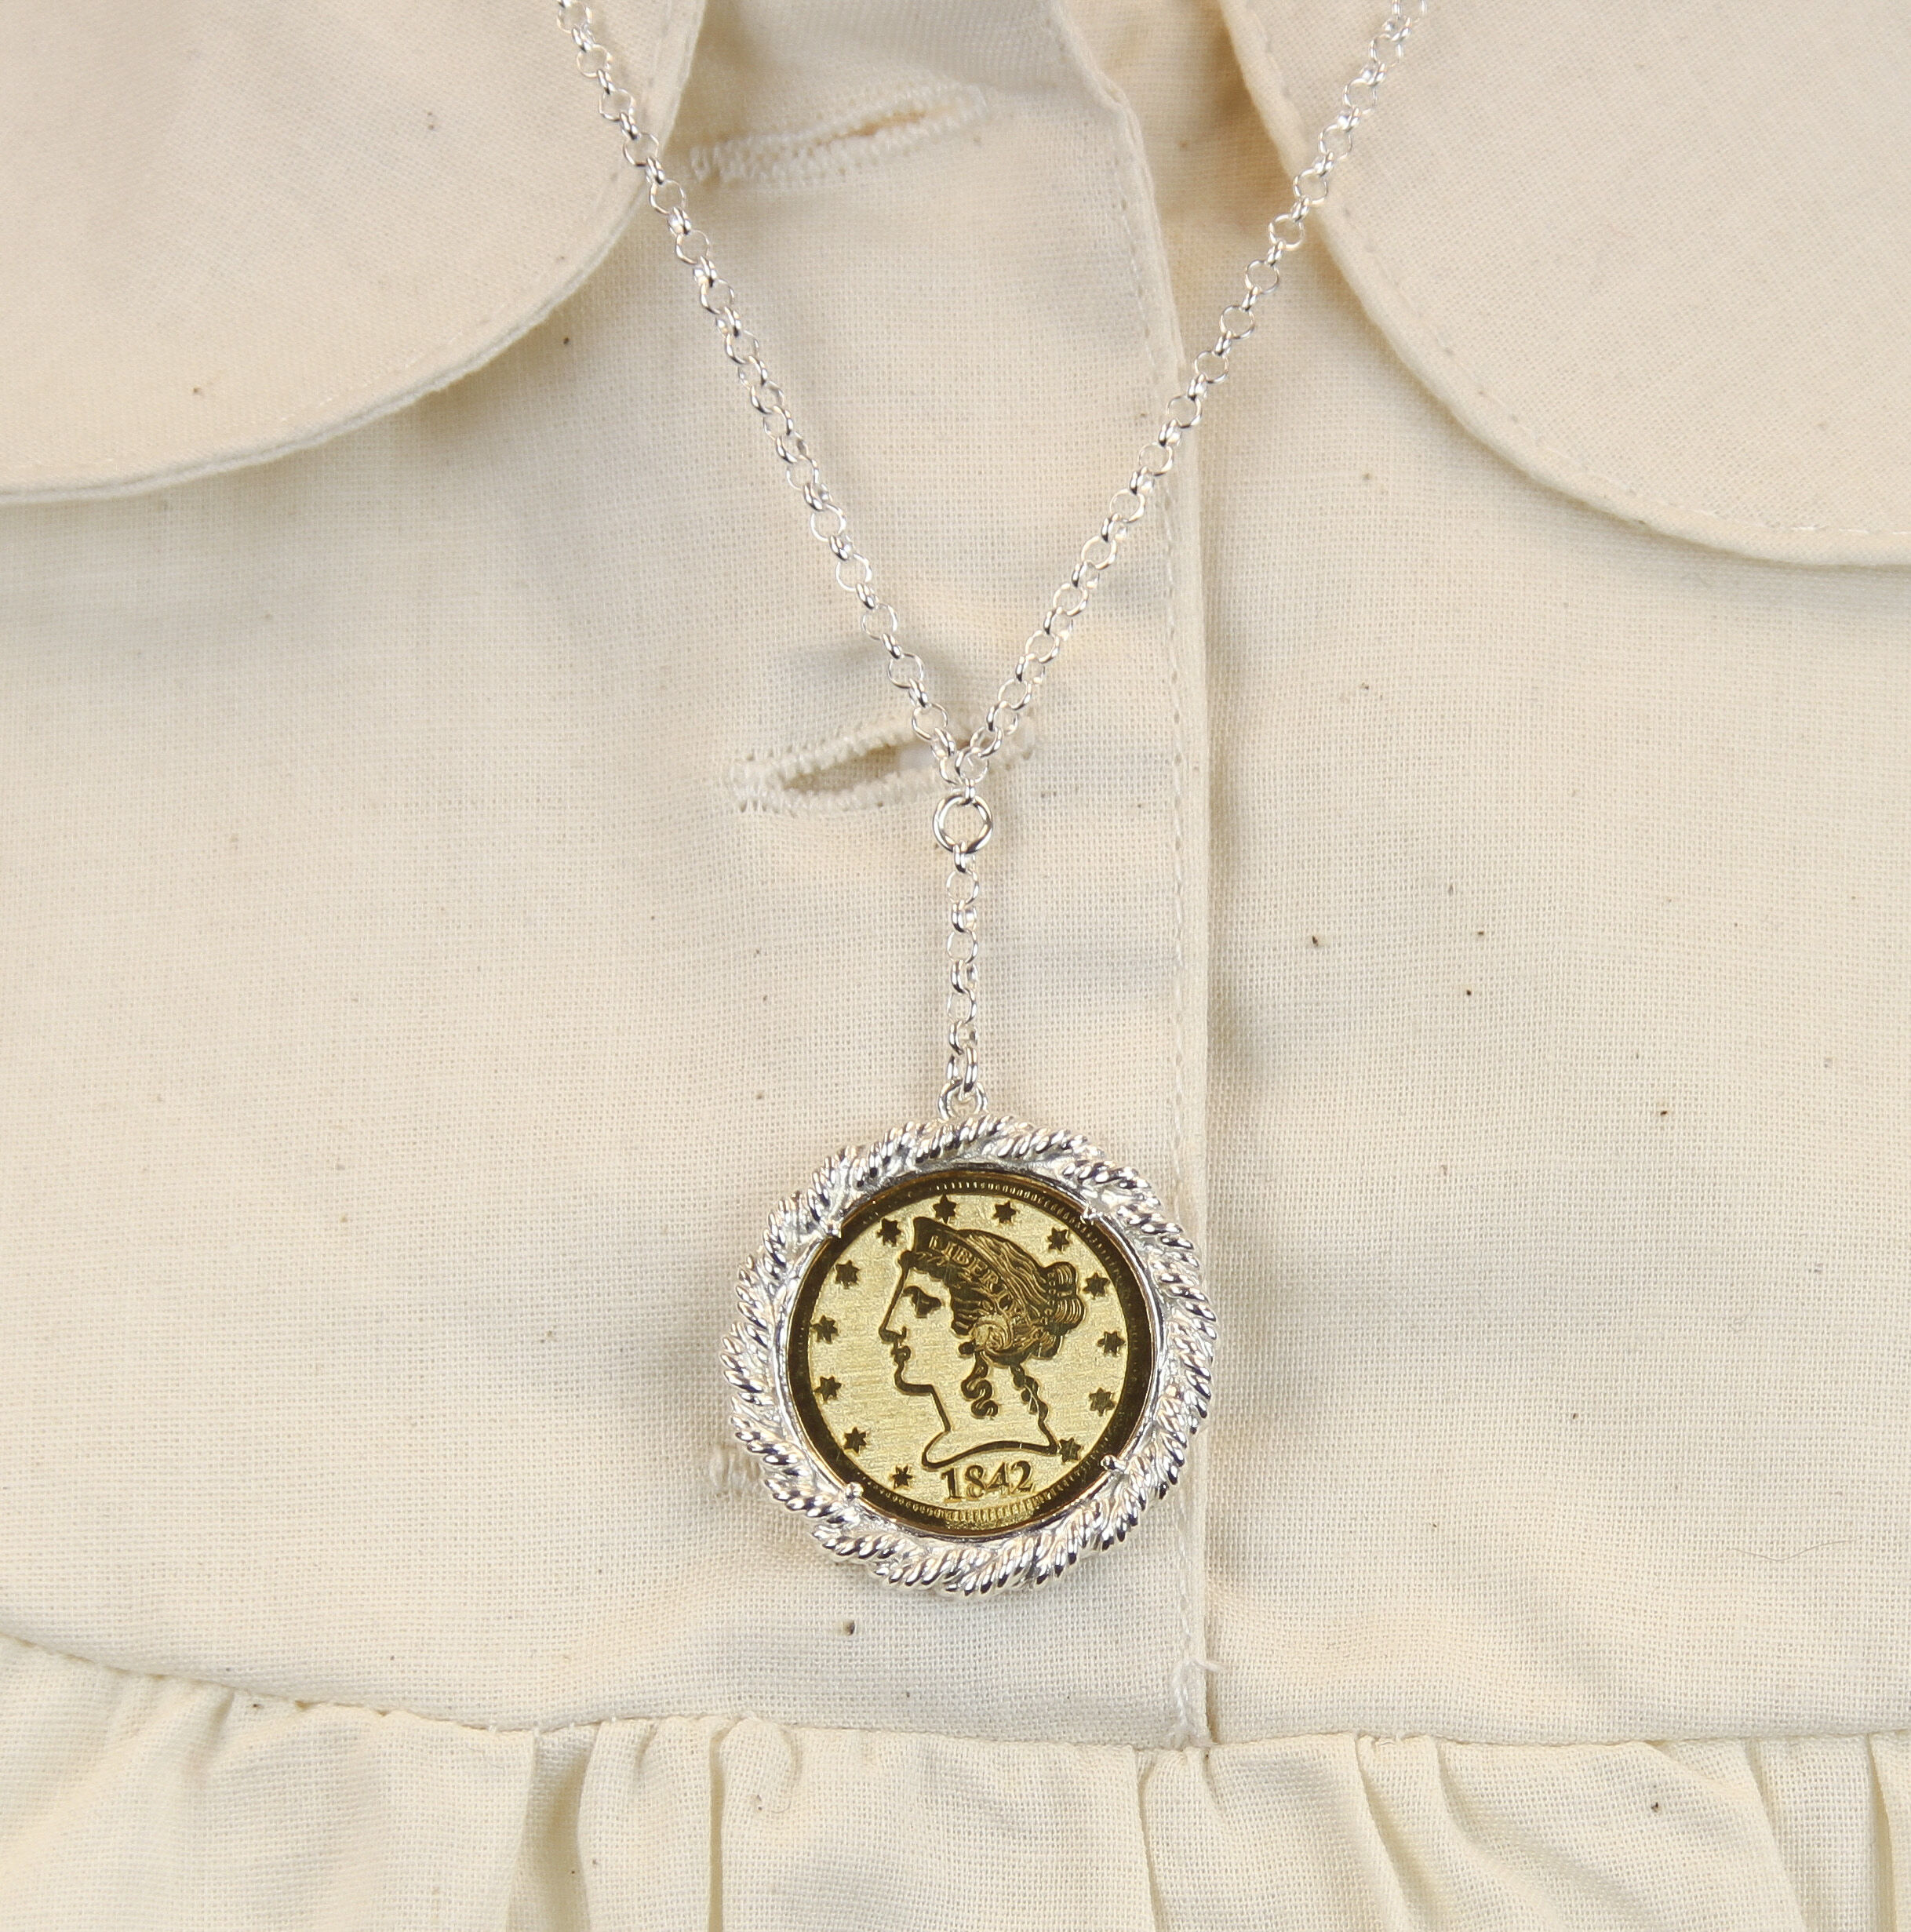 Queen Elizabeth II Coin Charm Necklace – Lè Silber Co - The Silver Company